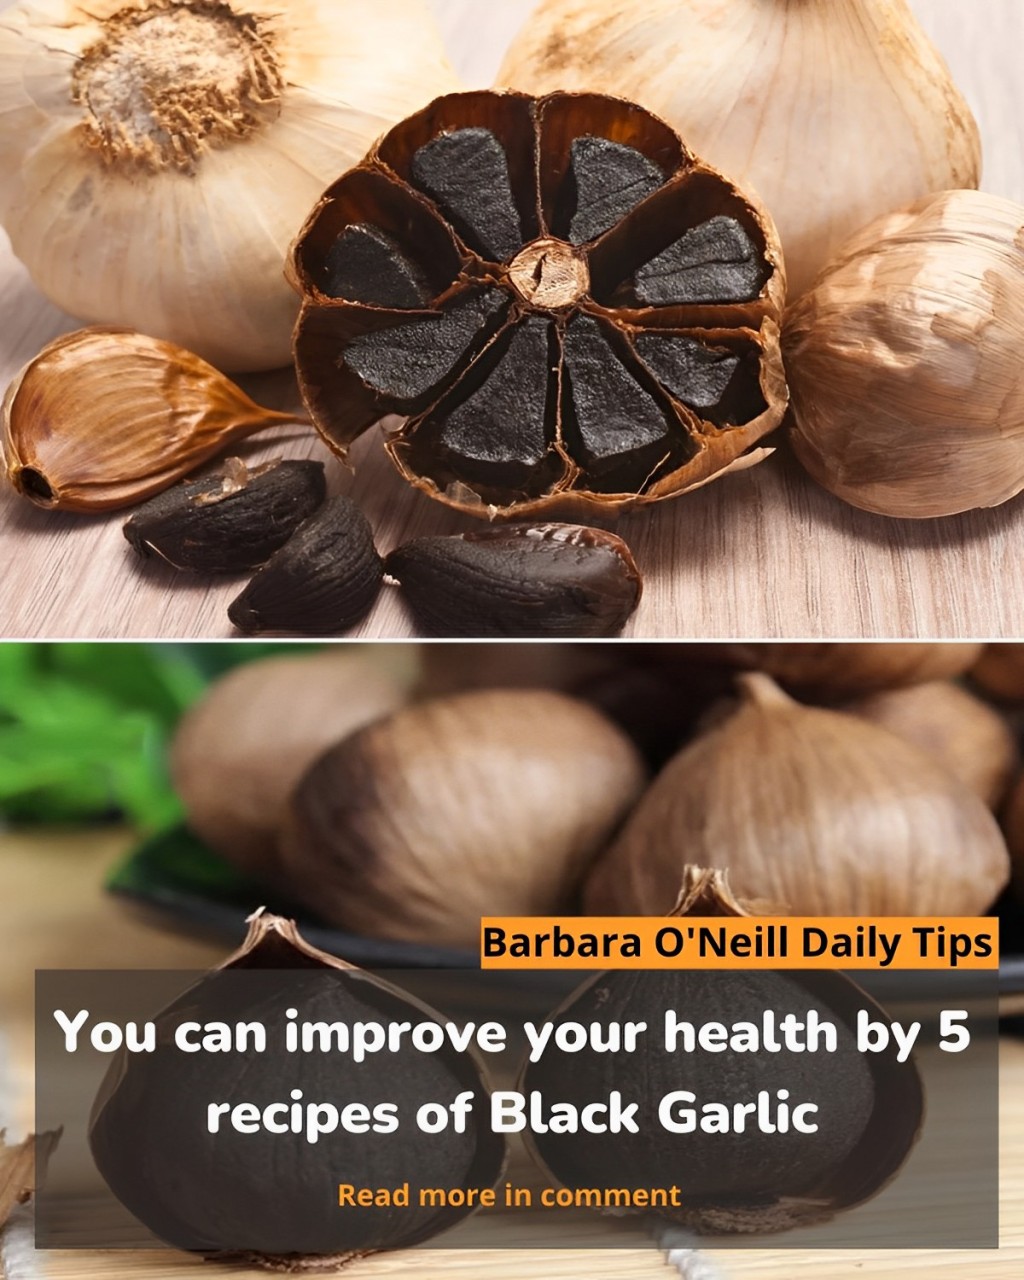 You can improve your health by 5 recipes of Black Garlic